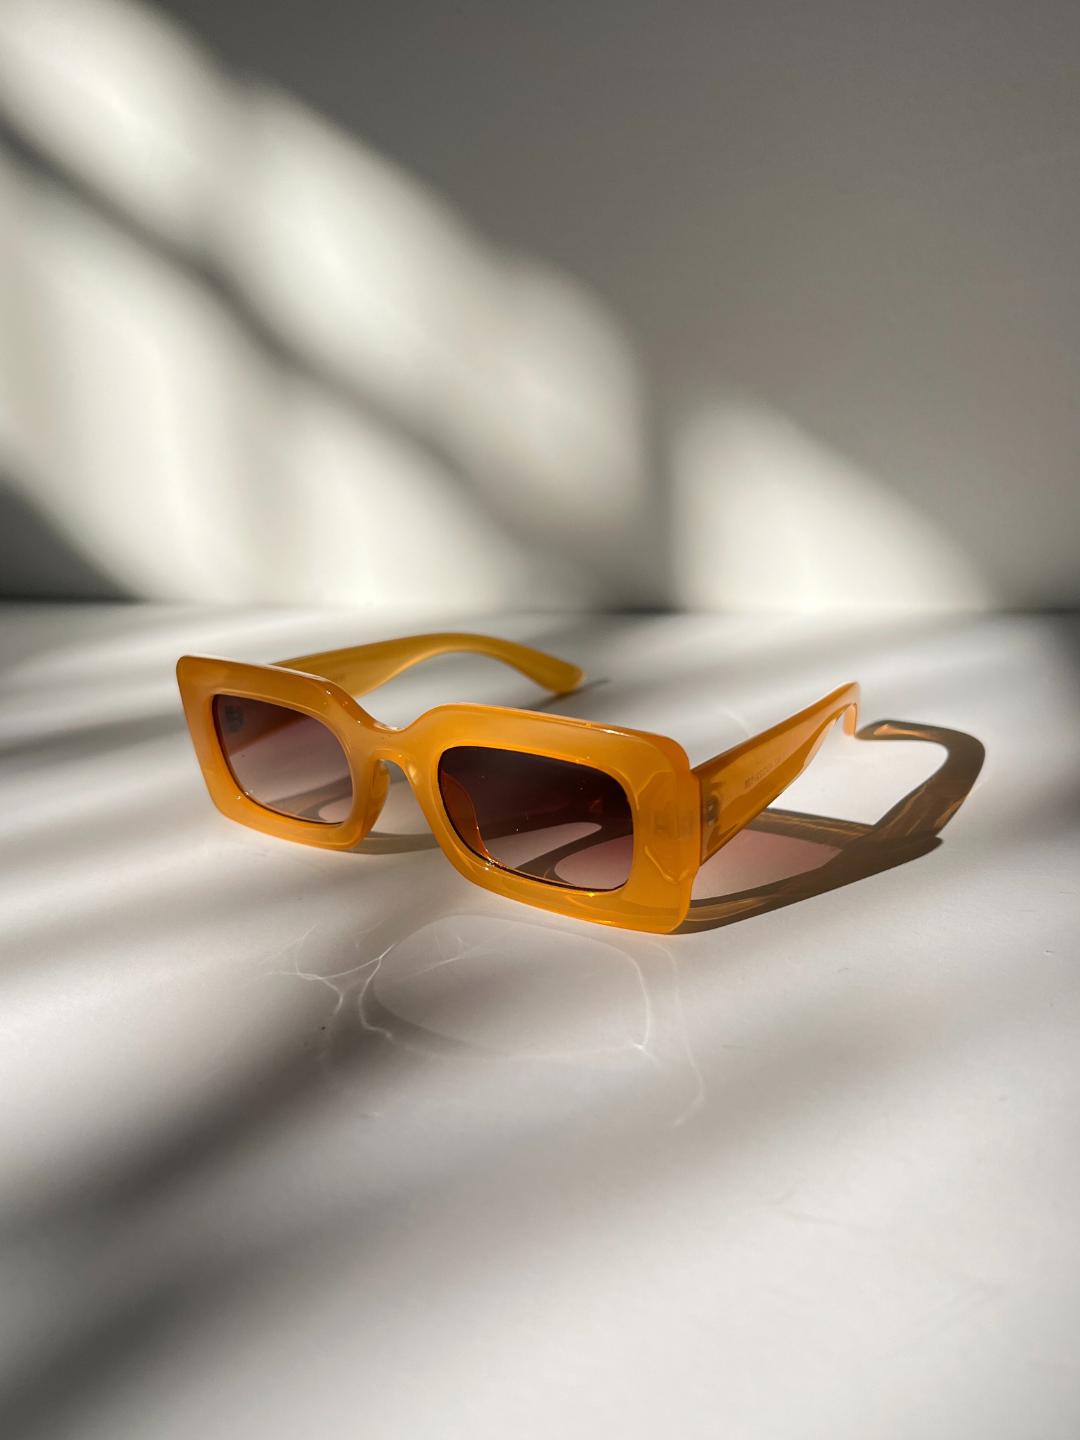 Kids rectangle sunglasses in orange, on a grey background with areas of sunlight, creating shadows of the sunglasses.